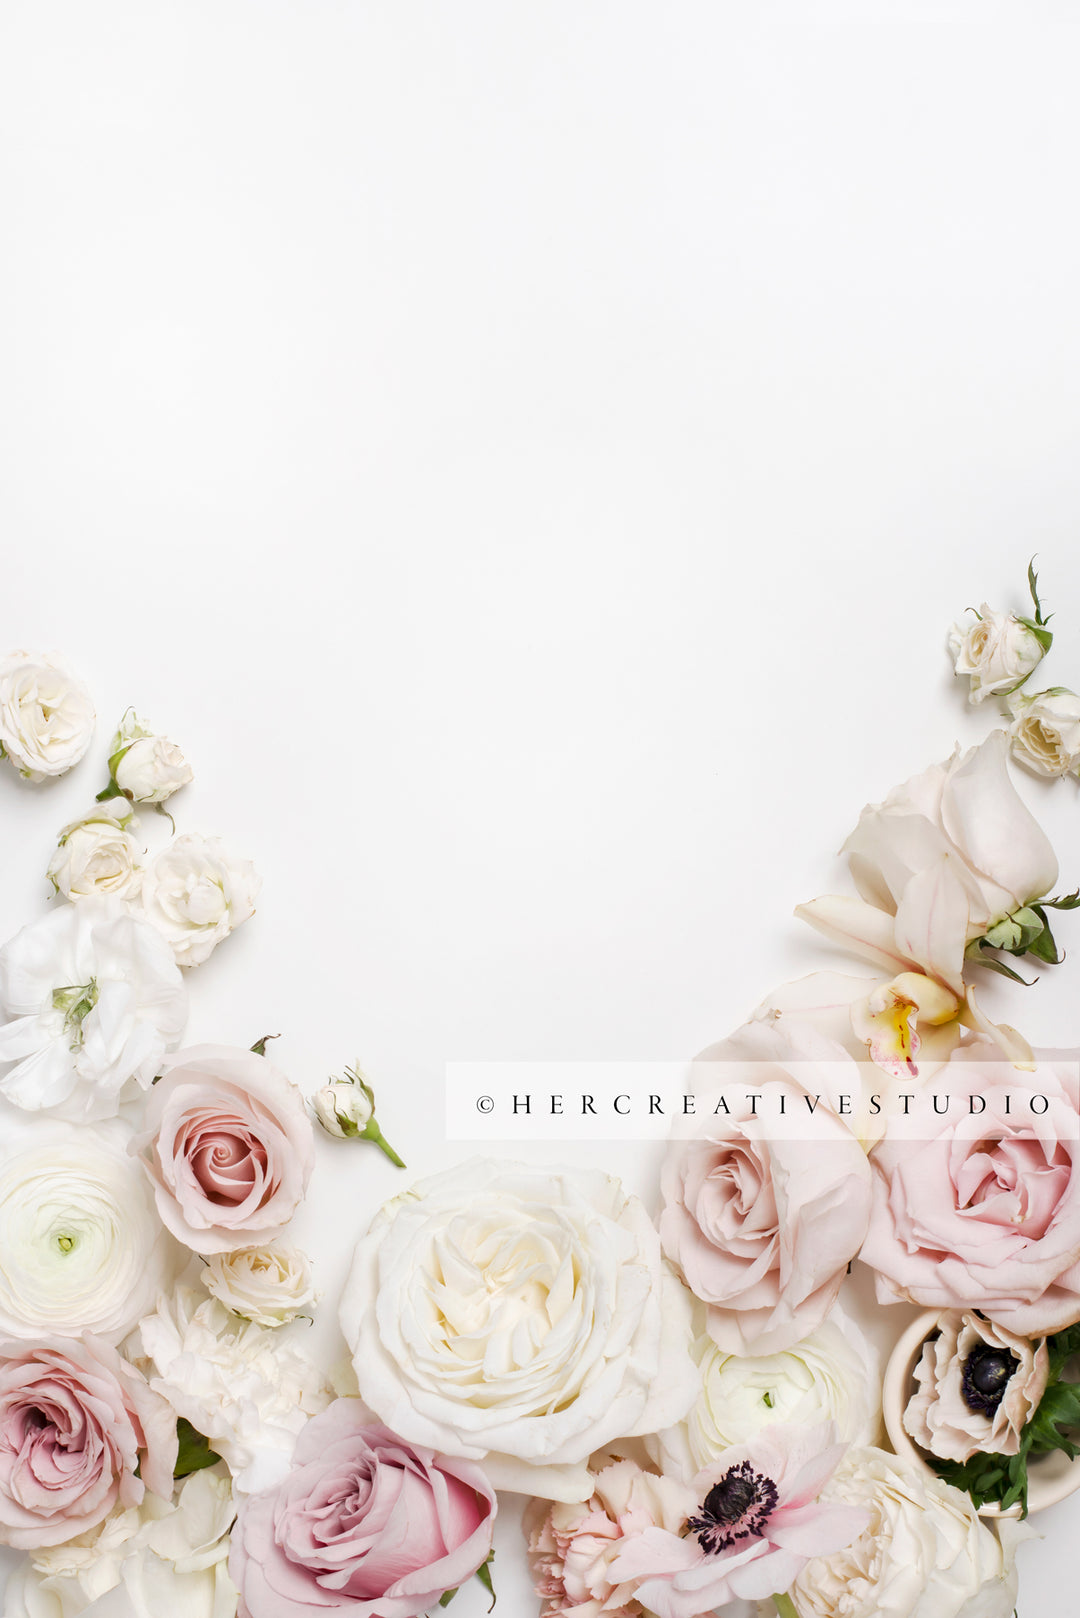 Pink and White Flowers on White Background, Styled Stock Image